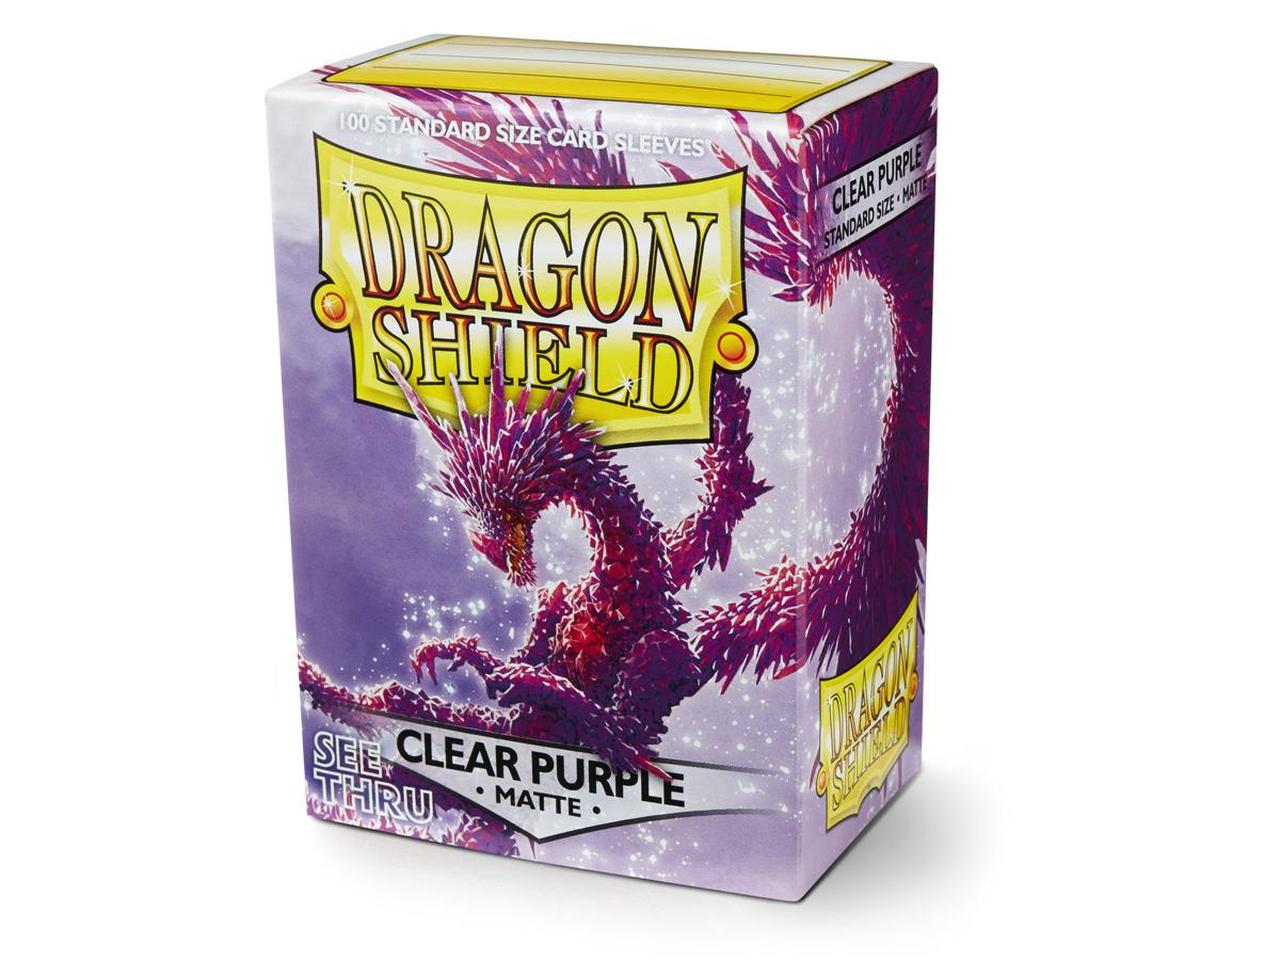 Dragon Shield Perfect Fit Sealable (Japanese Size) – Mothership Books and  Games TX